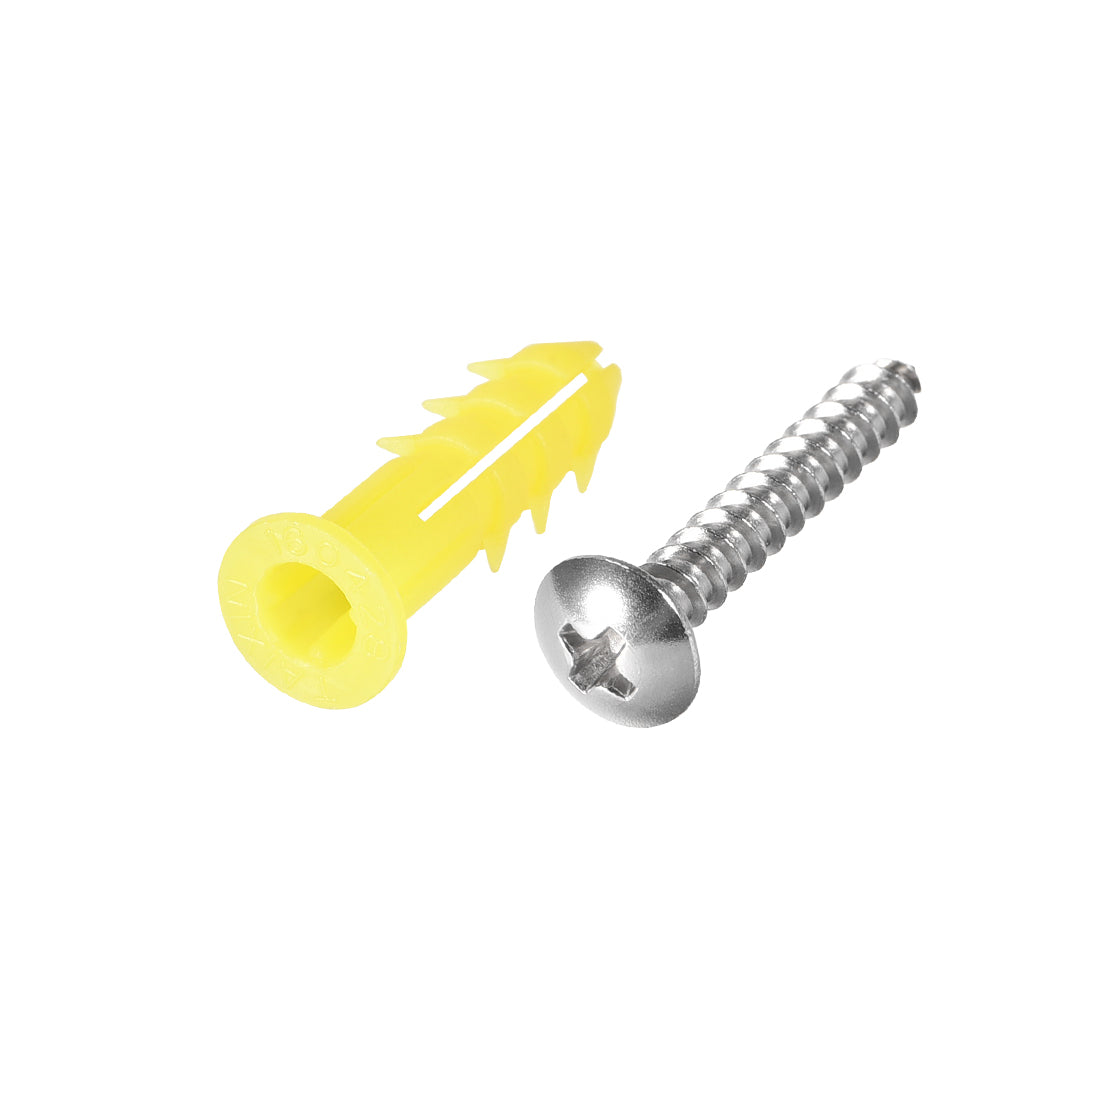 uxcell Uxcell 6 x 26mm Plastic Expansion Tube for Drywall with Screws, Yellow 75pcs